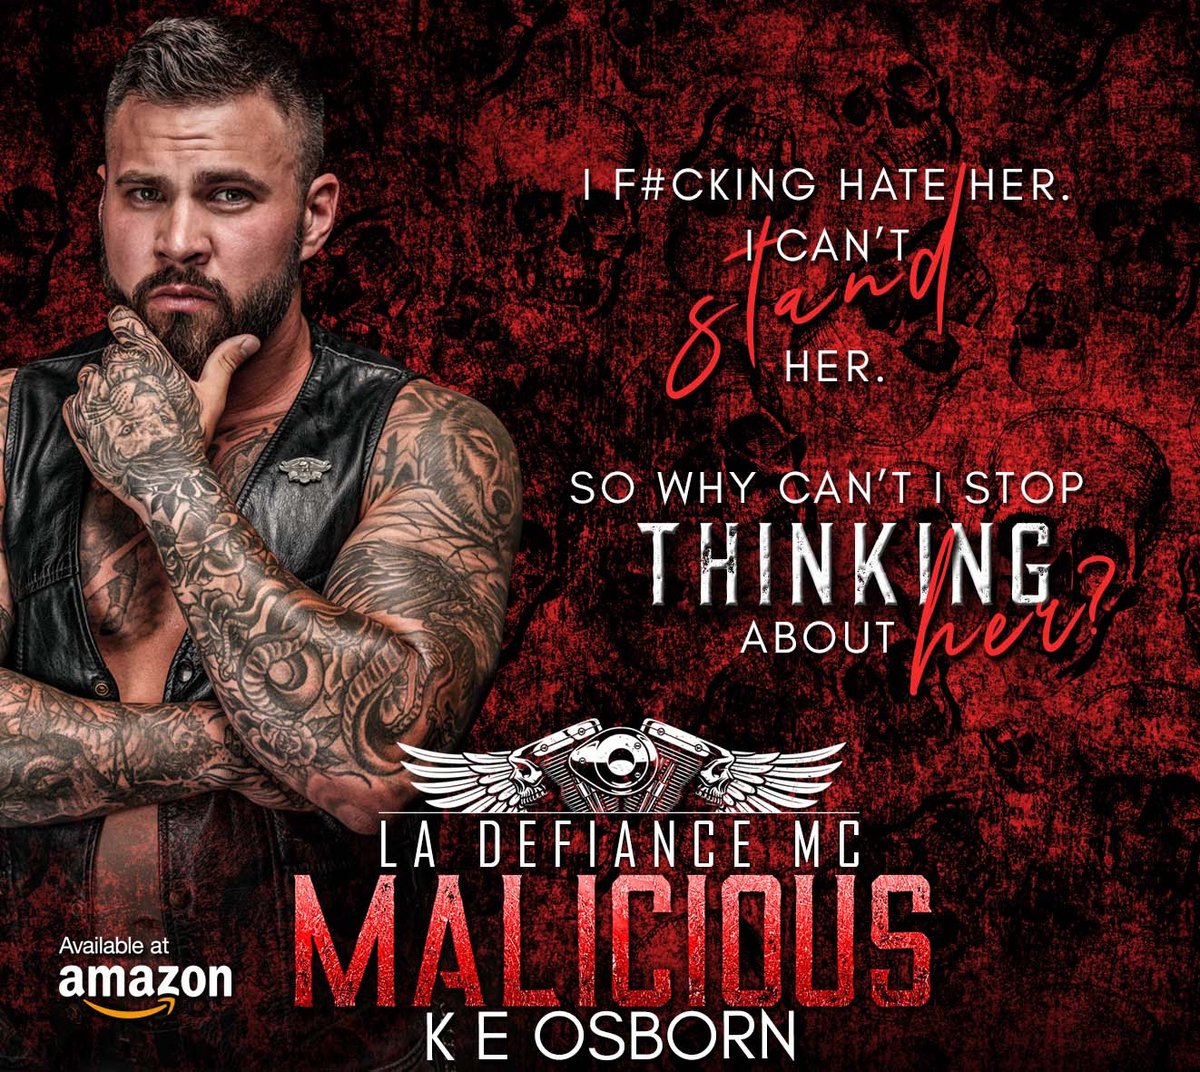 It's #TeaserTime for Malicious by K E Osborn! Coming 5/13!

#Preorder: geni.us/mladevents

#MCRomance #AlphaholeHero #EnemiestoLovers #ForcedProximity #Forbidden #TouchHerandDie @Chaotic_Creativ